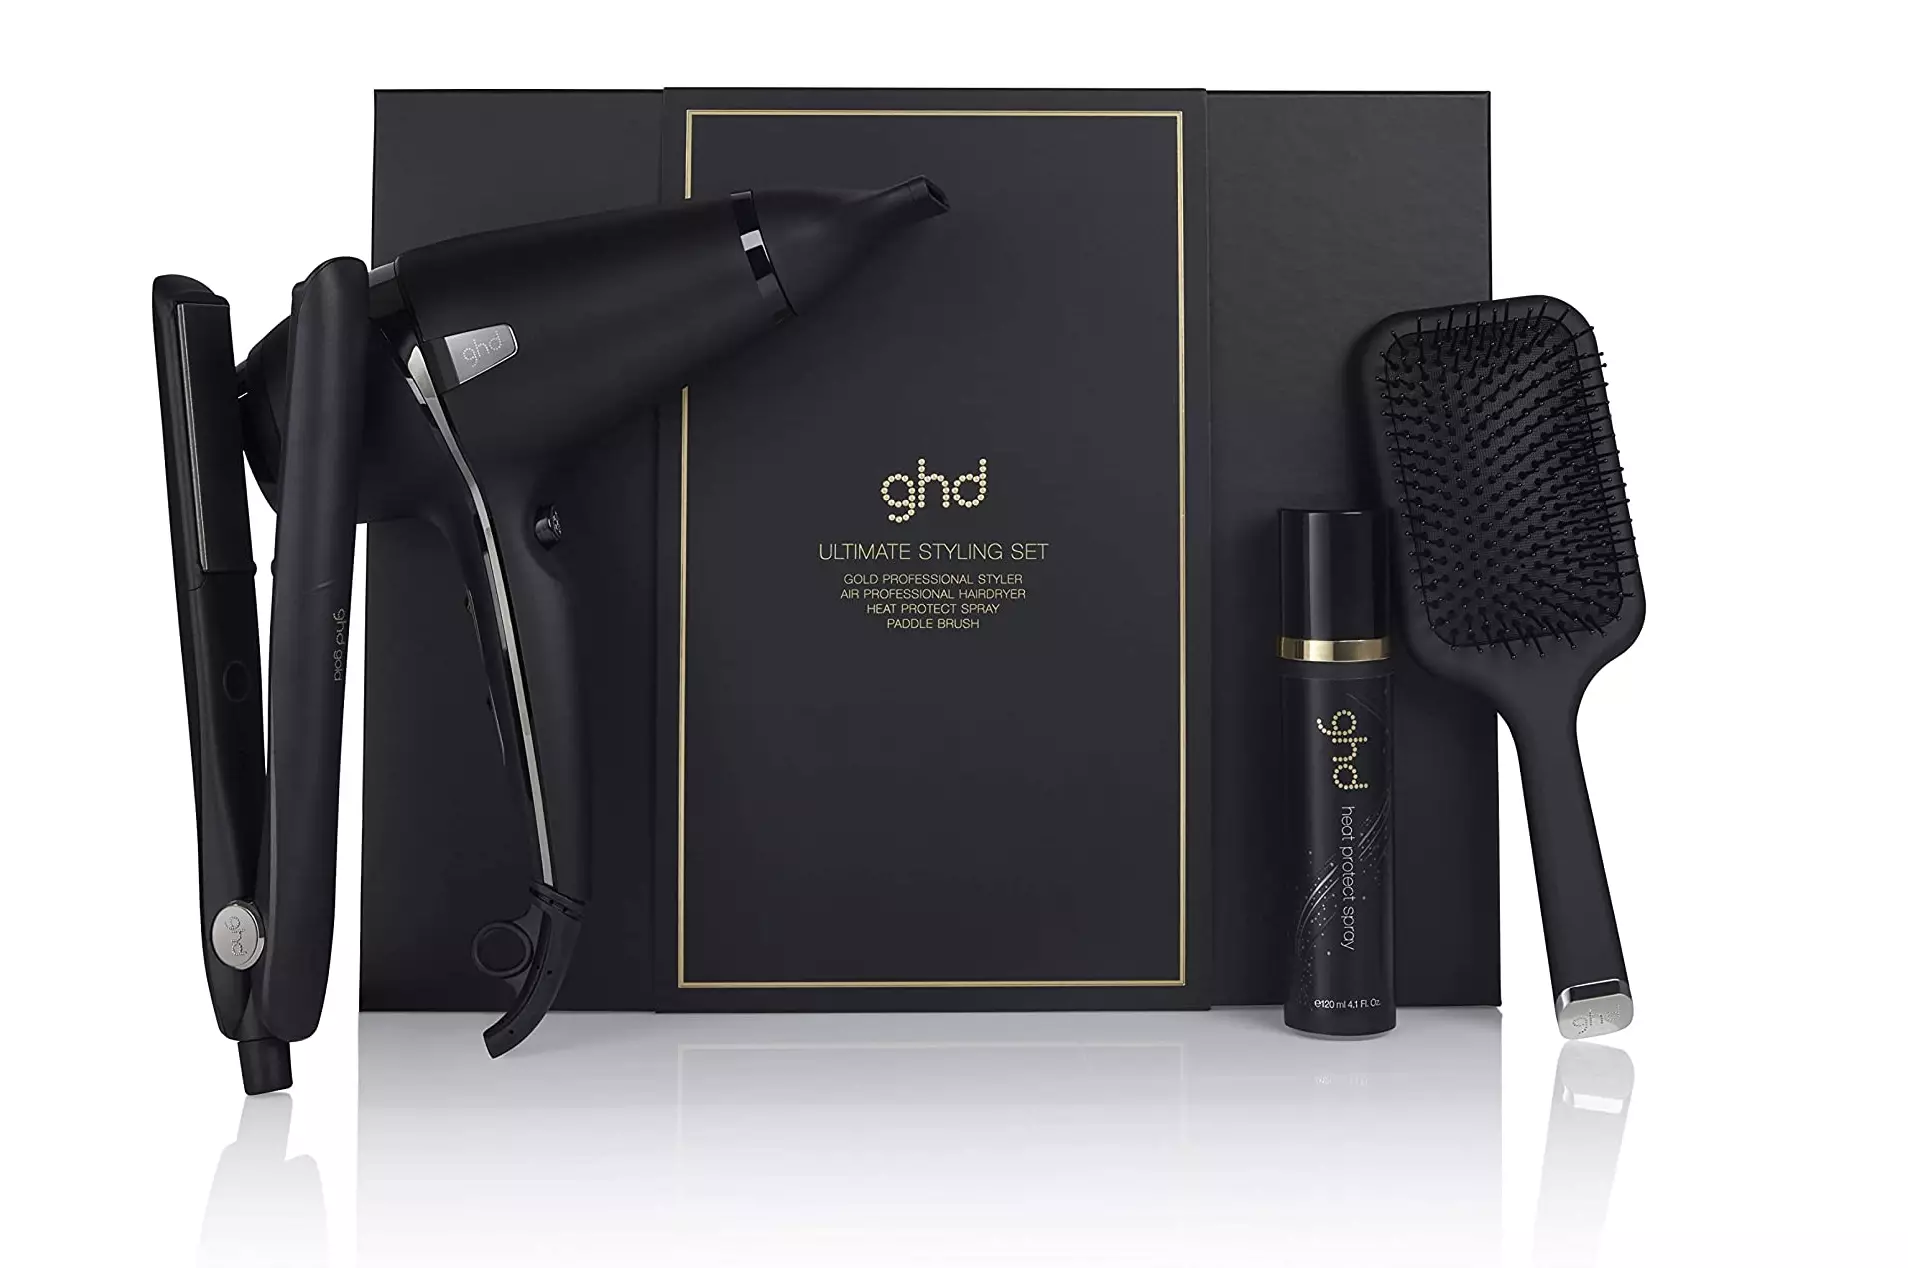 The ghd kit comes with straighteners and a hair dryer (